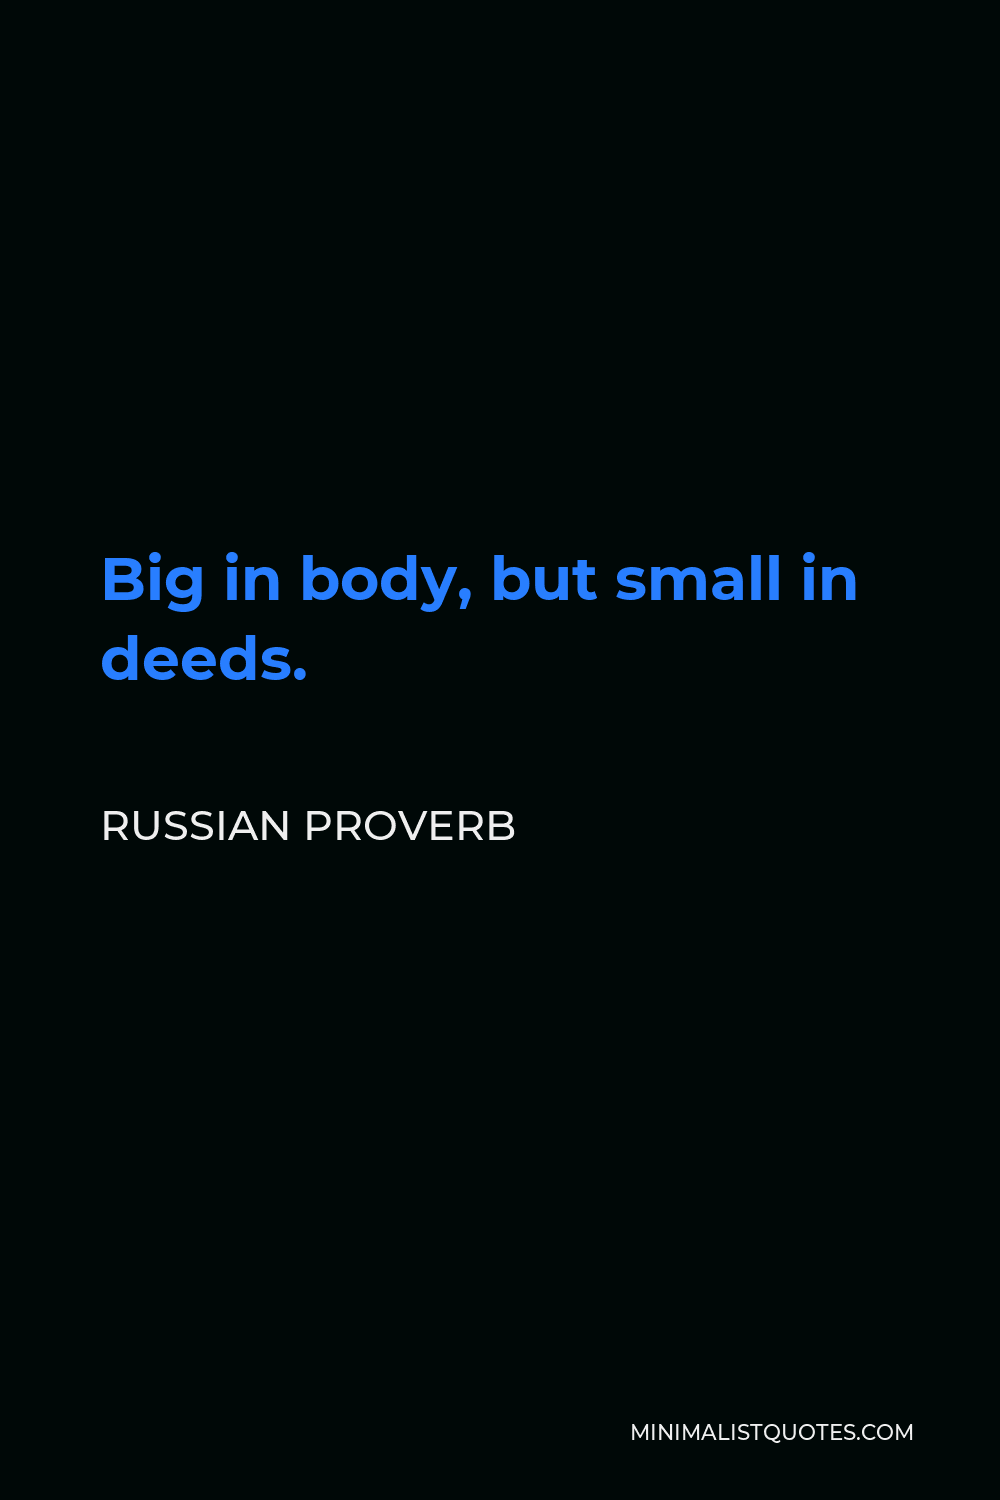 Russian Proverb Quote - Big in body, but small in deeds.